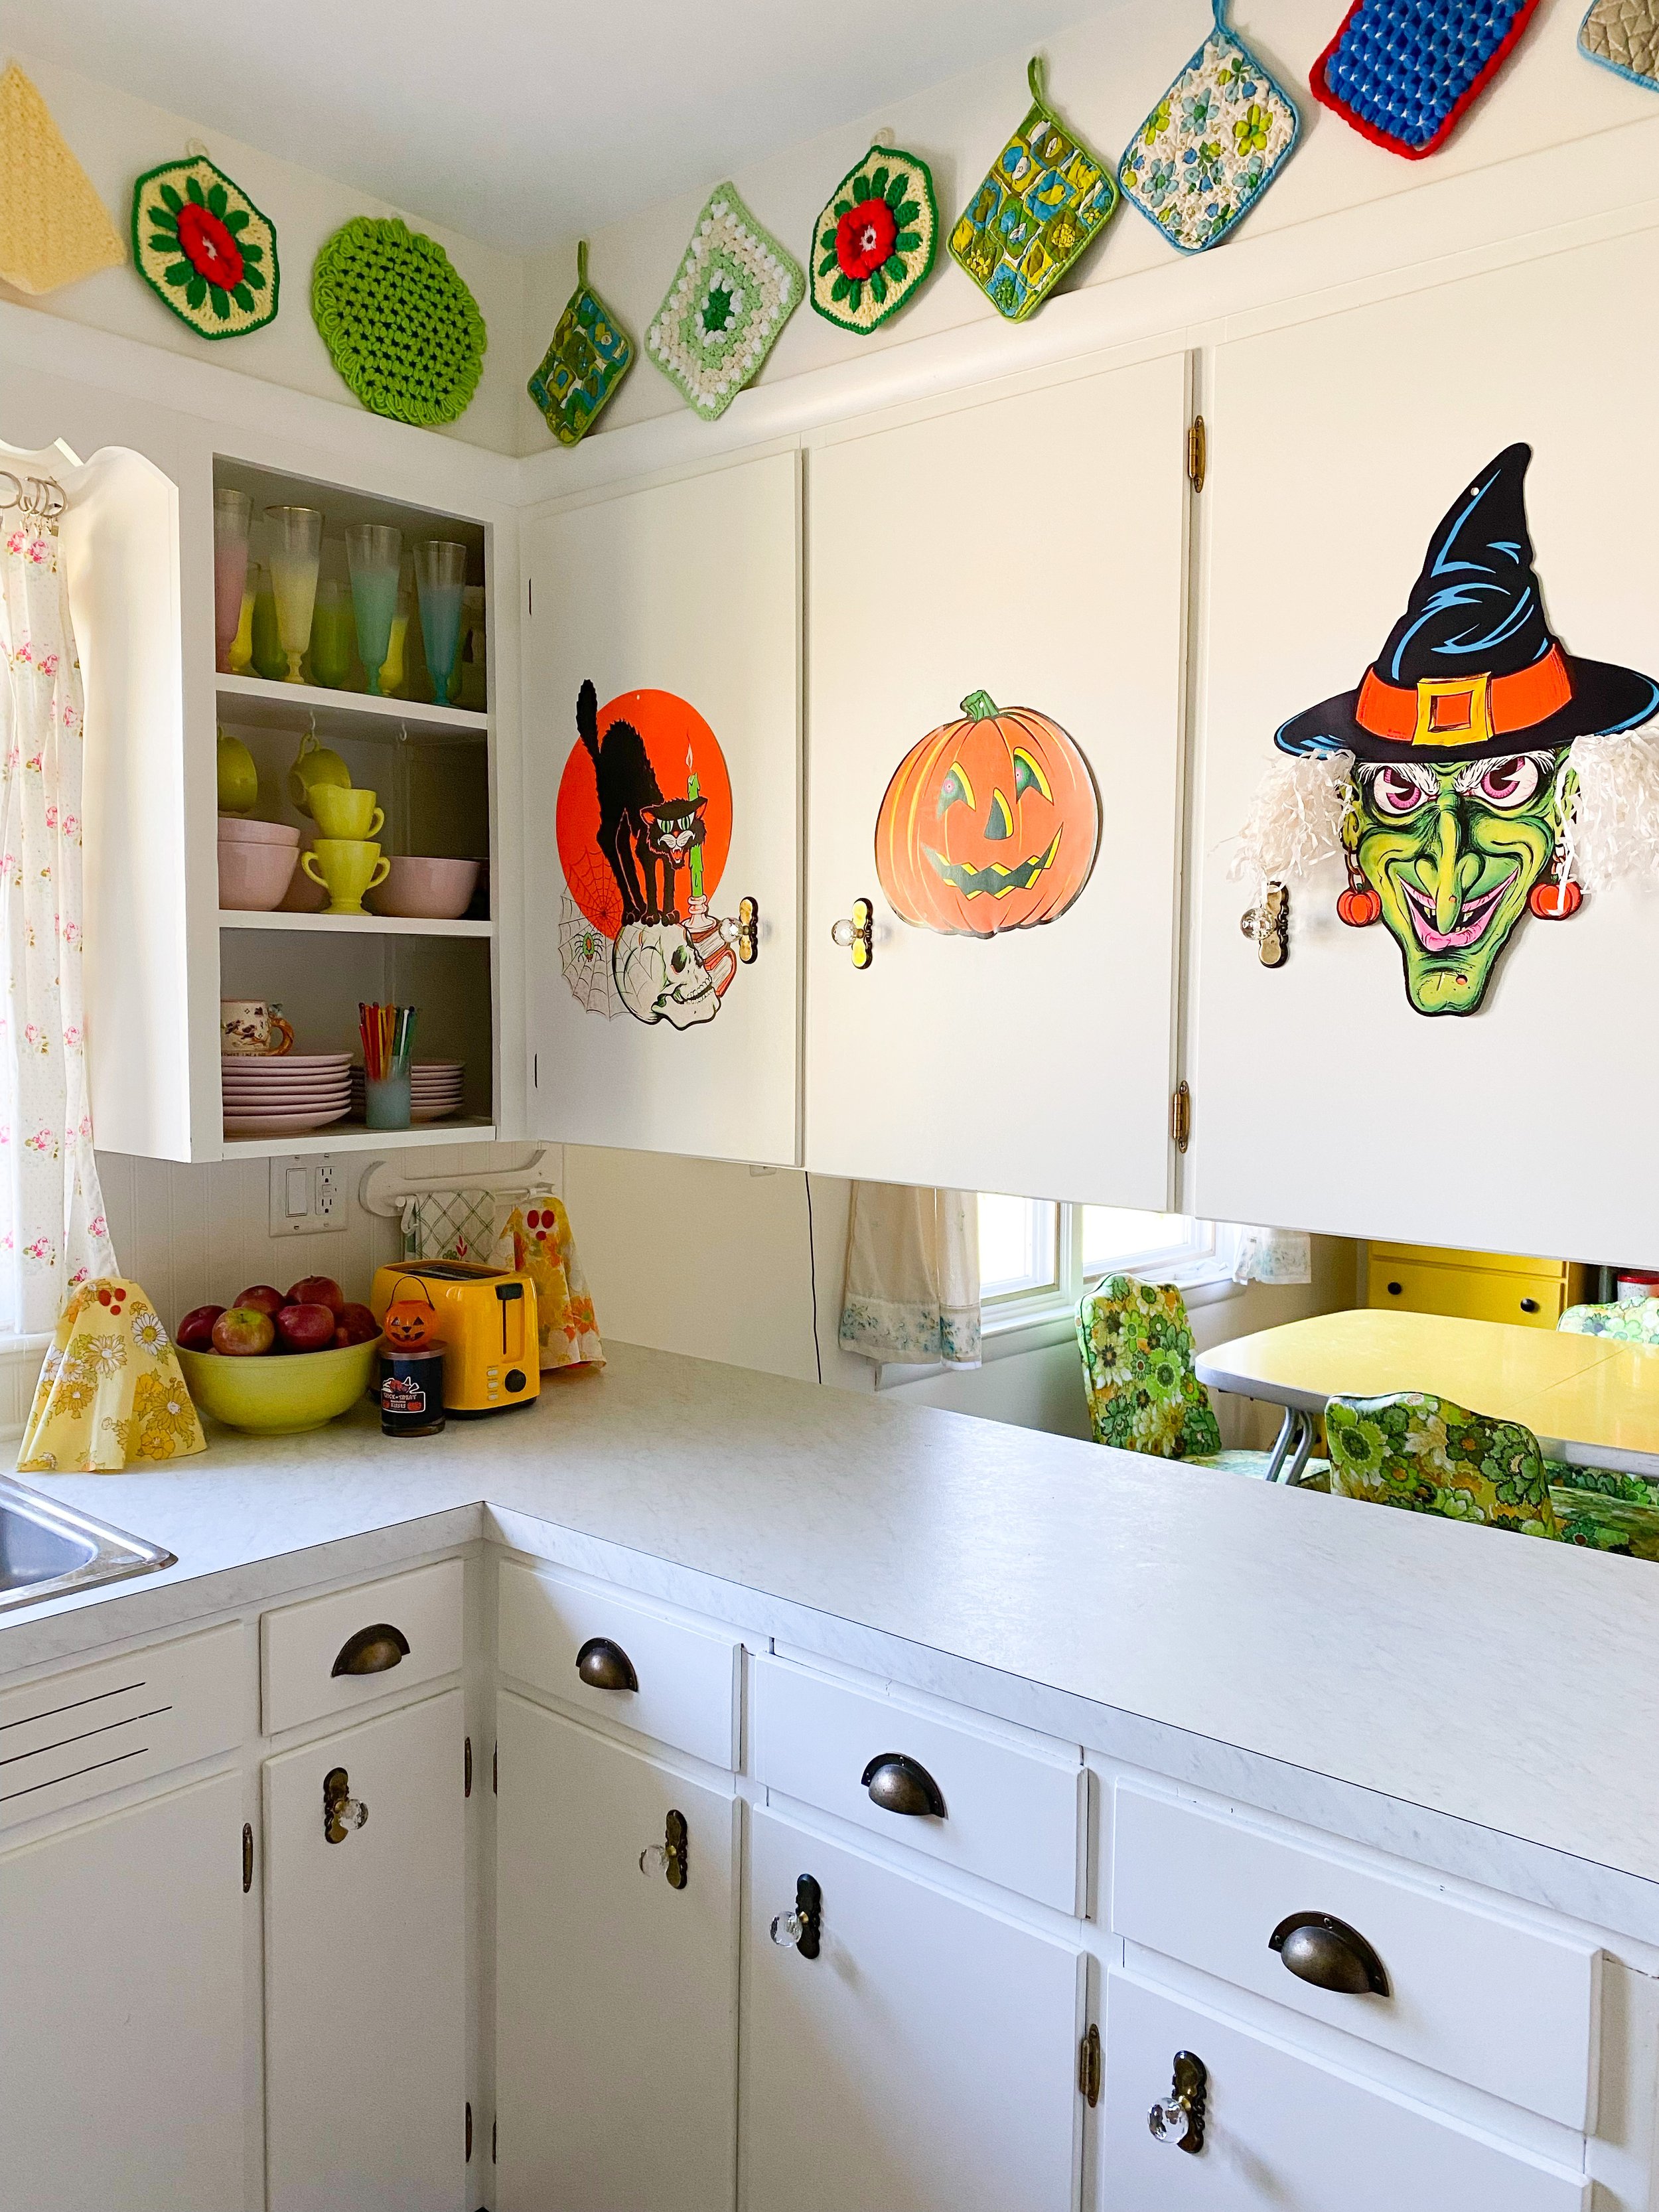 Transform Your Kitchen into a Halloween Scene